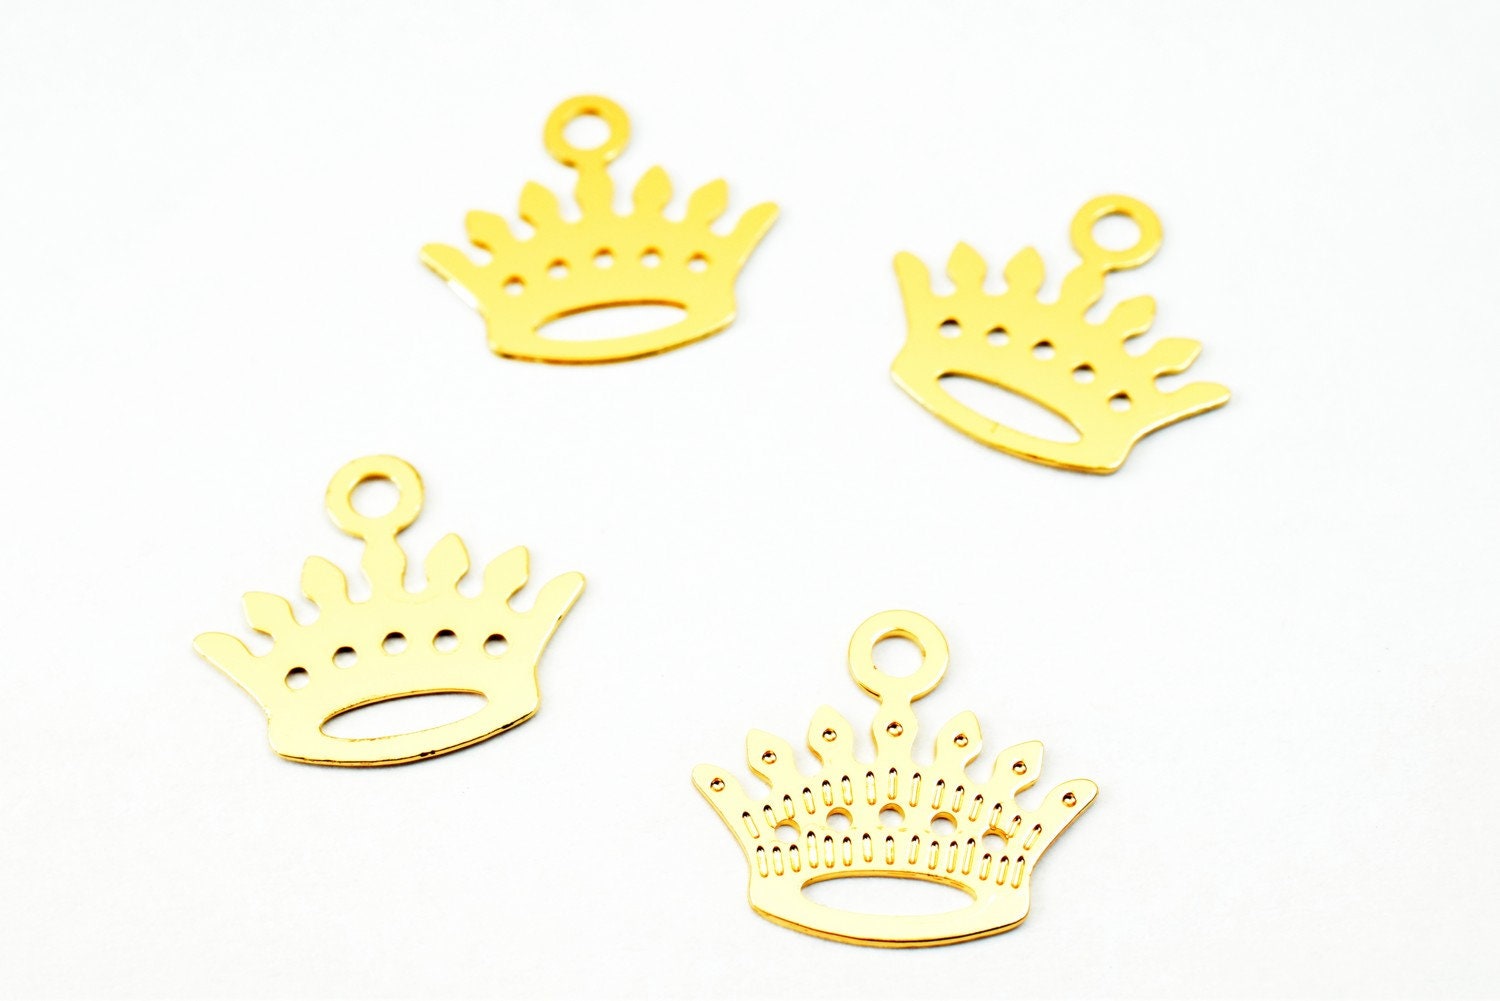 6 PCs Dainty Thin 18K Pinky as Gold Filled tarnish resistant Crown Charm Pendant Size 12.5x14mm Thickness 0.25mm For Jewelry Making DGF14